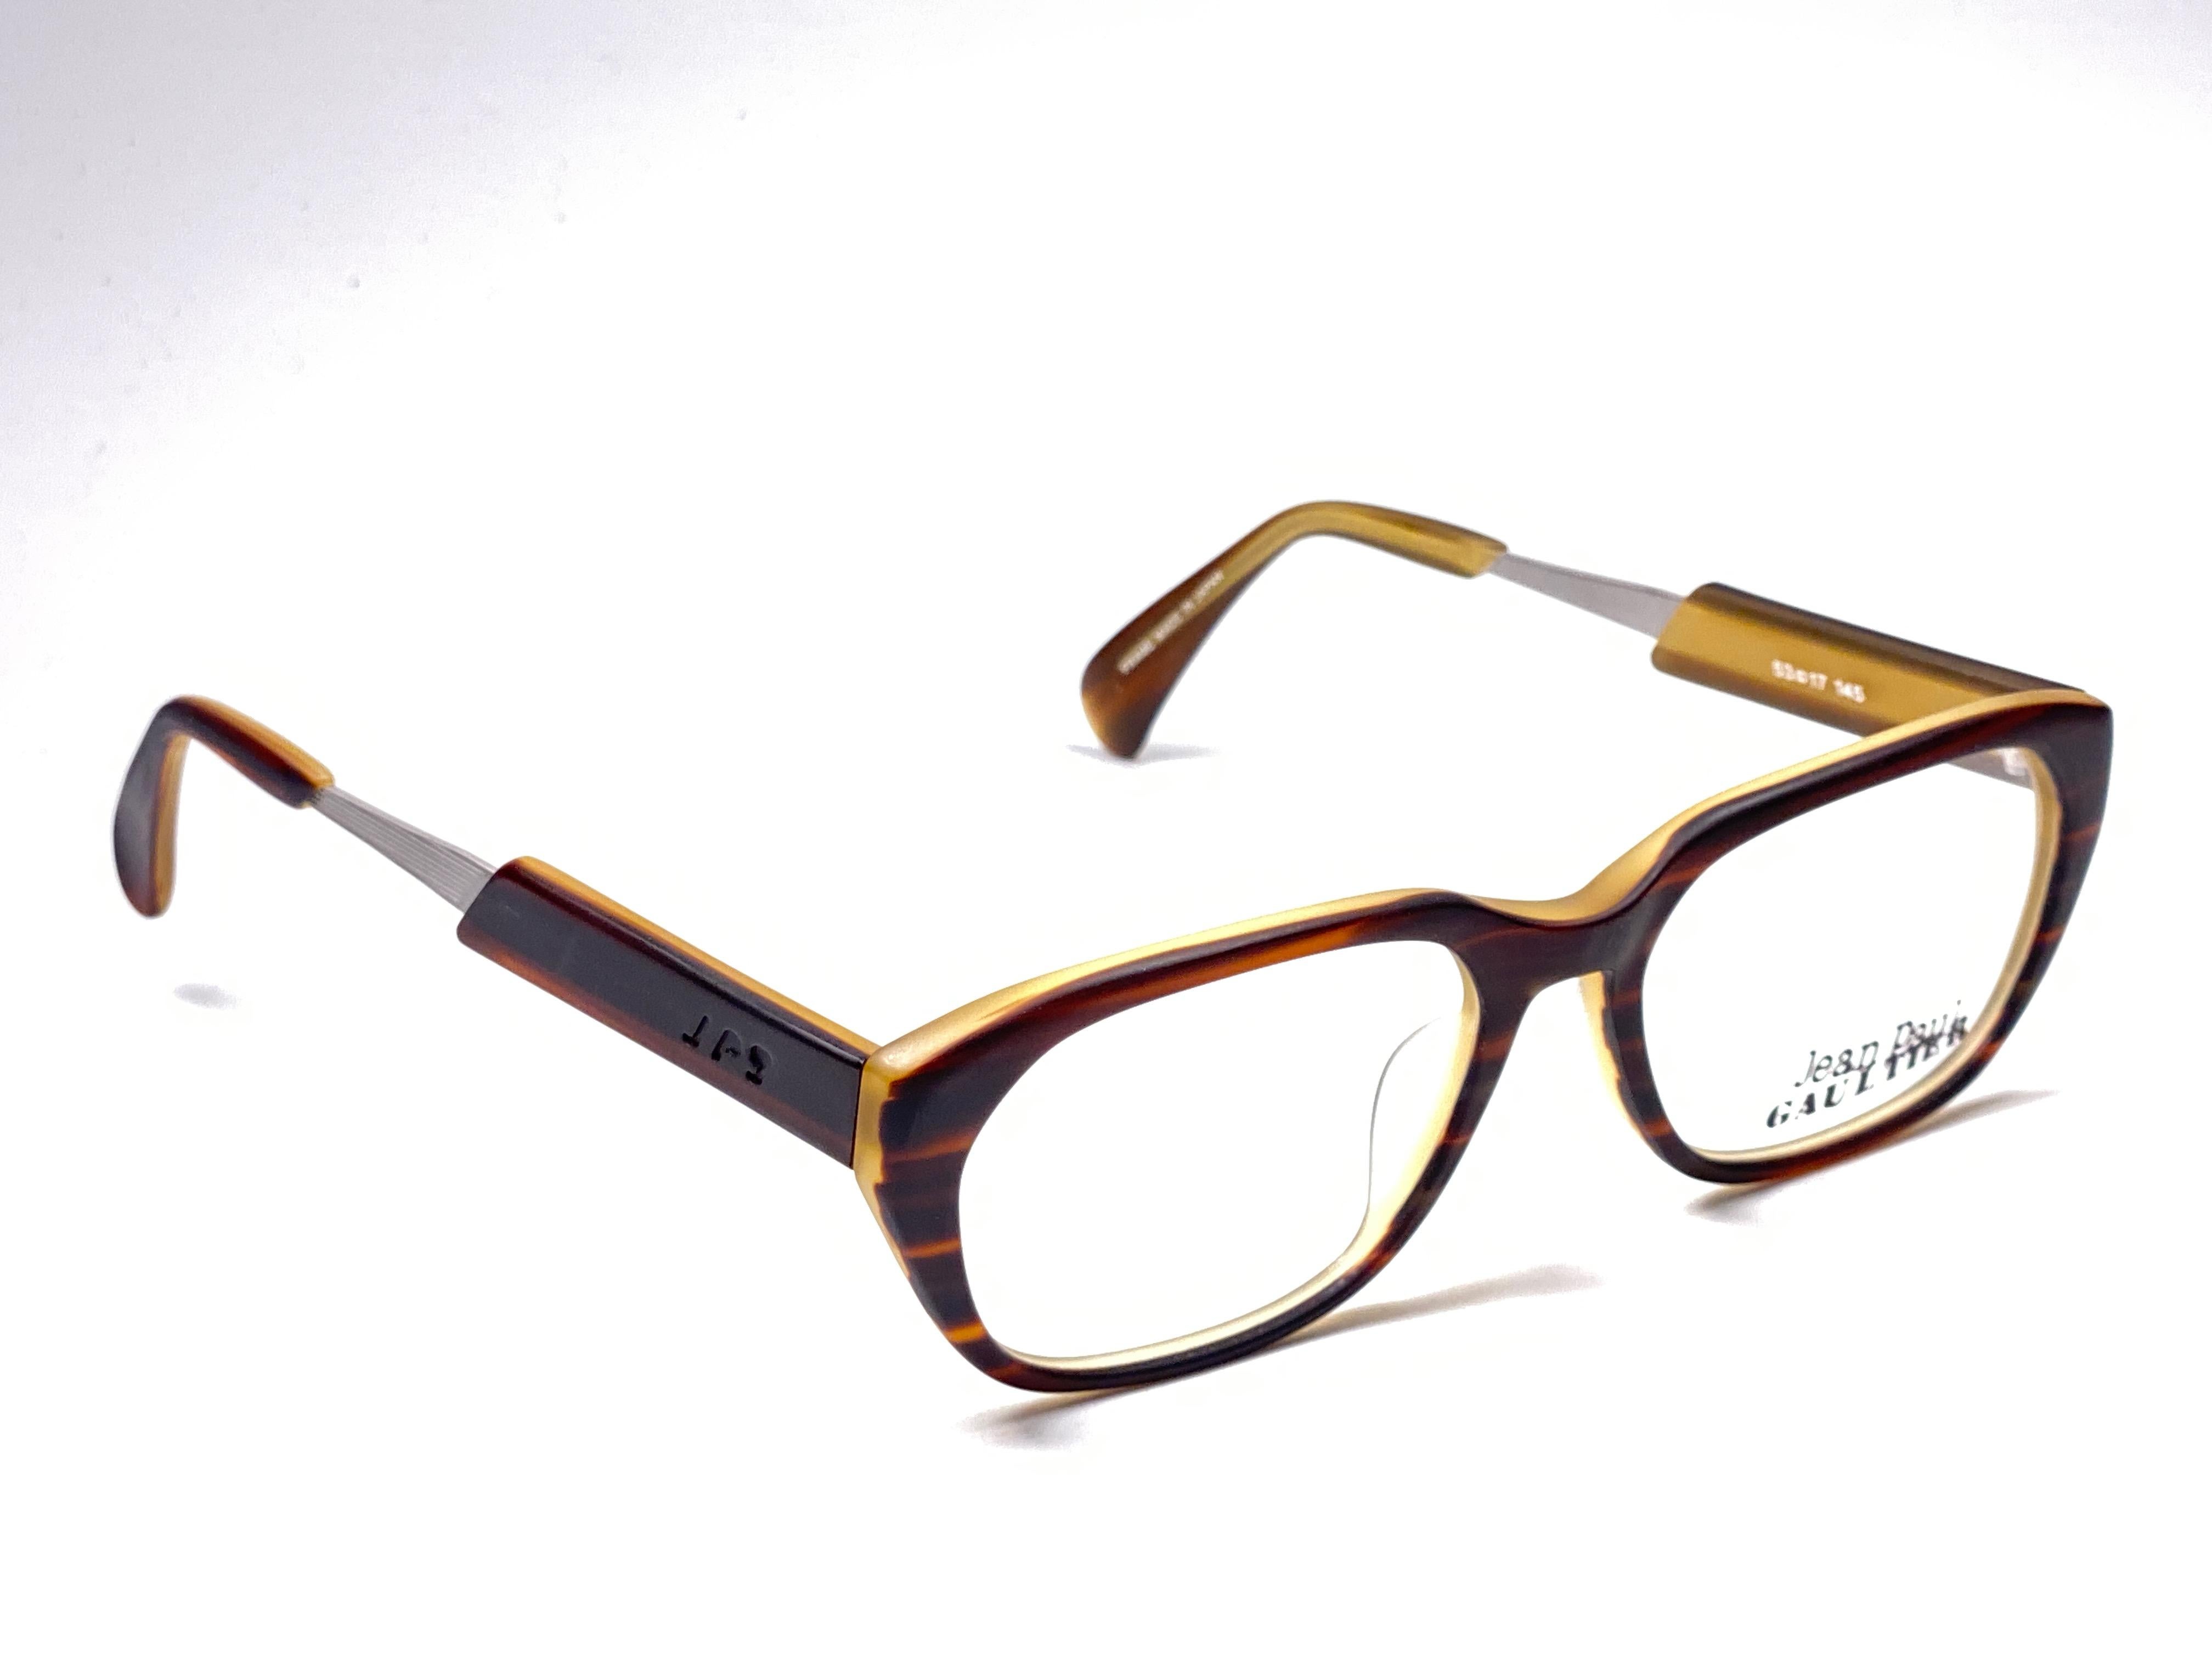 New Vintage Jean Paul Gaultier Junior medium frame in amber tortoise pattern.

Design and produced in the 1900's a timeless and iconic piece.
Ready for prescription lenses.
A true fashion statement.

FRONT : 13.5 CMS

LENS HEIGHT : 4 CMS

LENS WIDTH